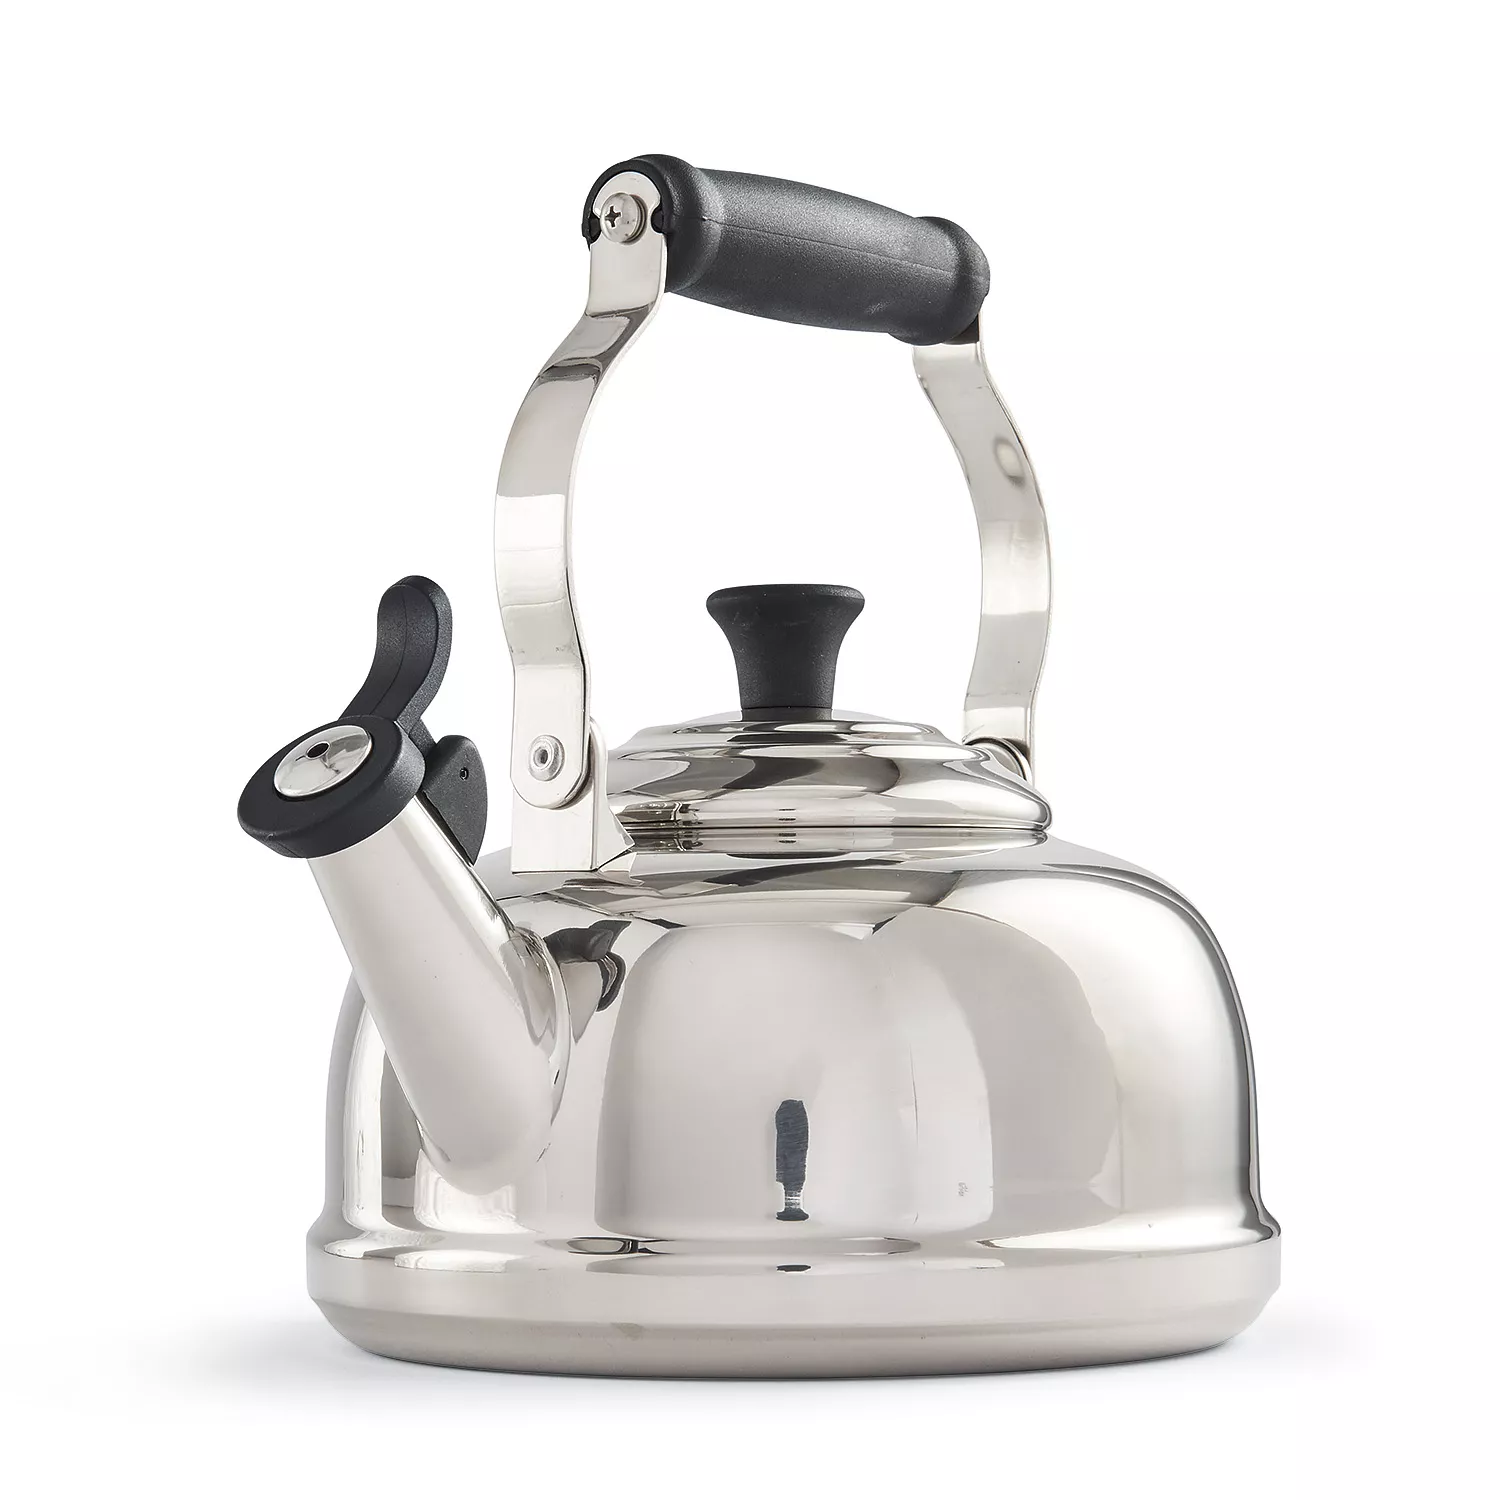 Le Creuset Classic Whistling Tea Kettle with Stainless Steel Knob - Oyster